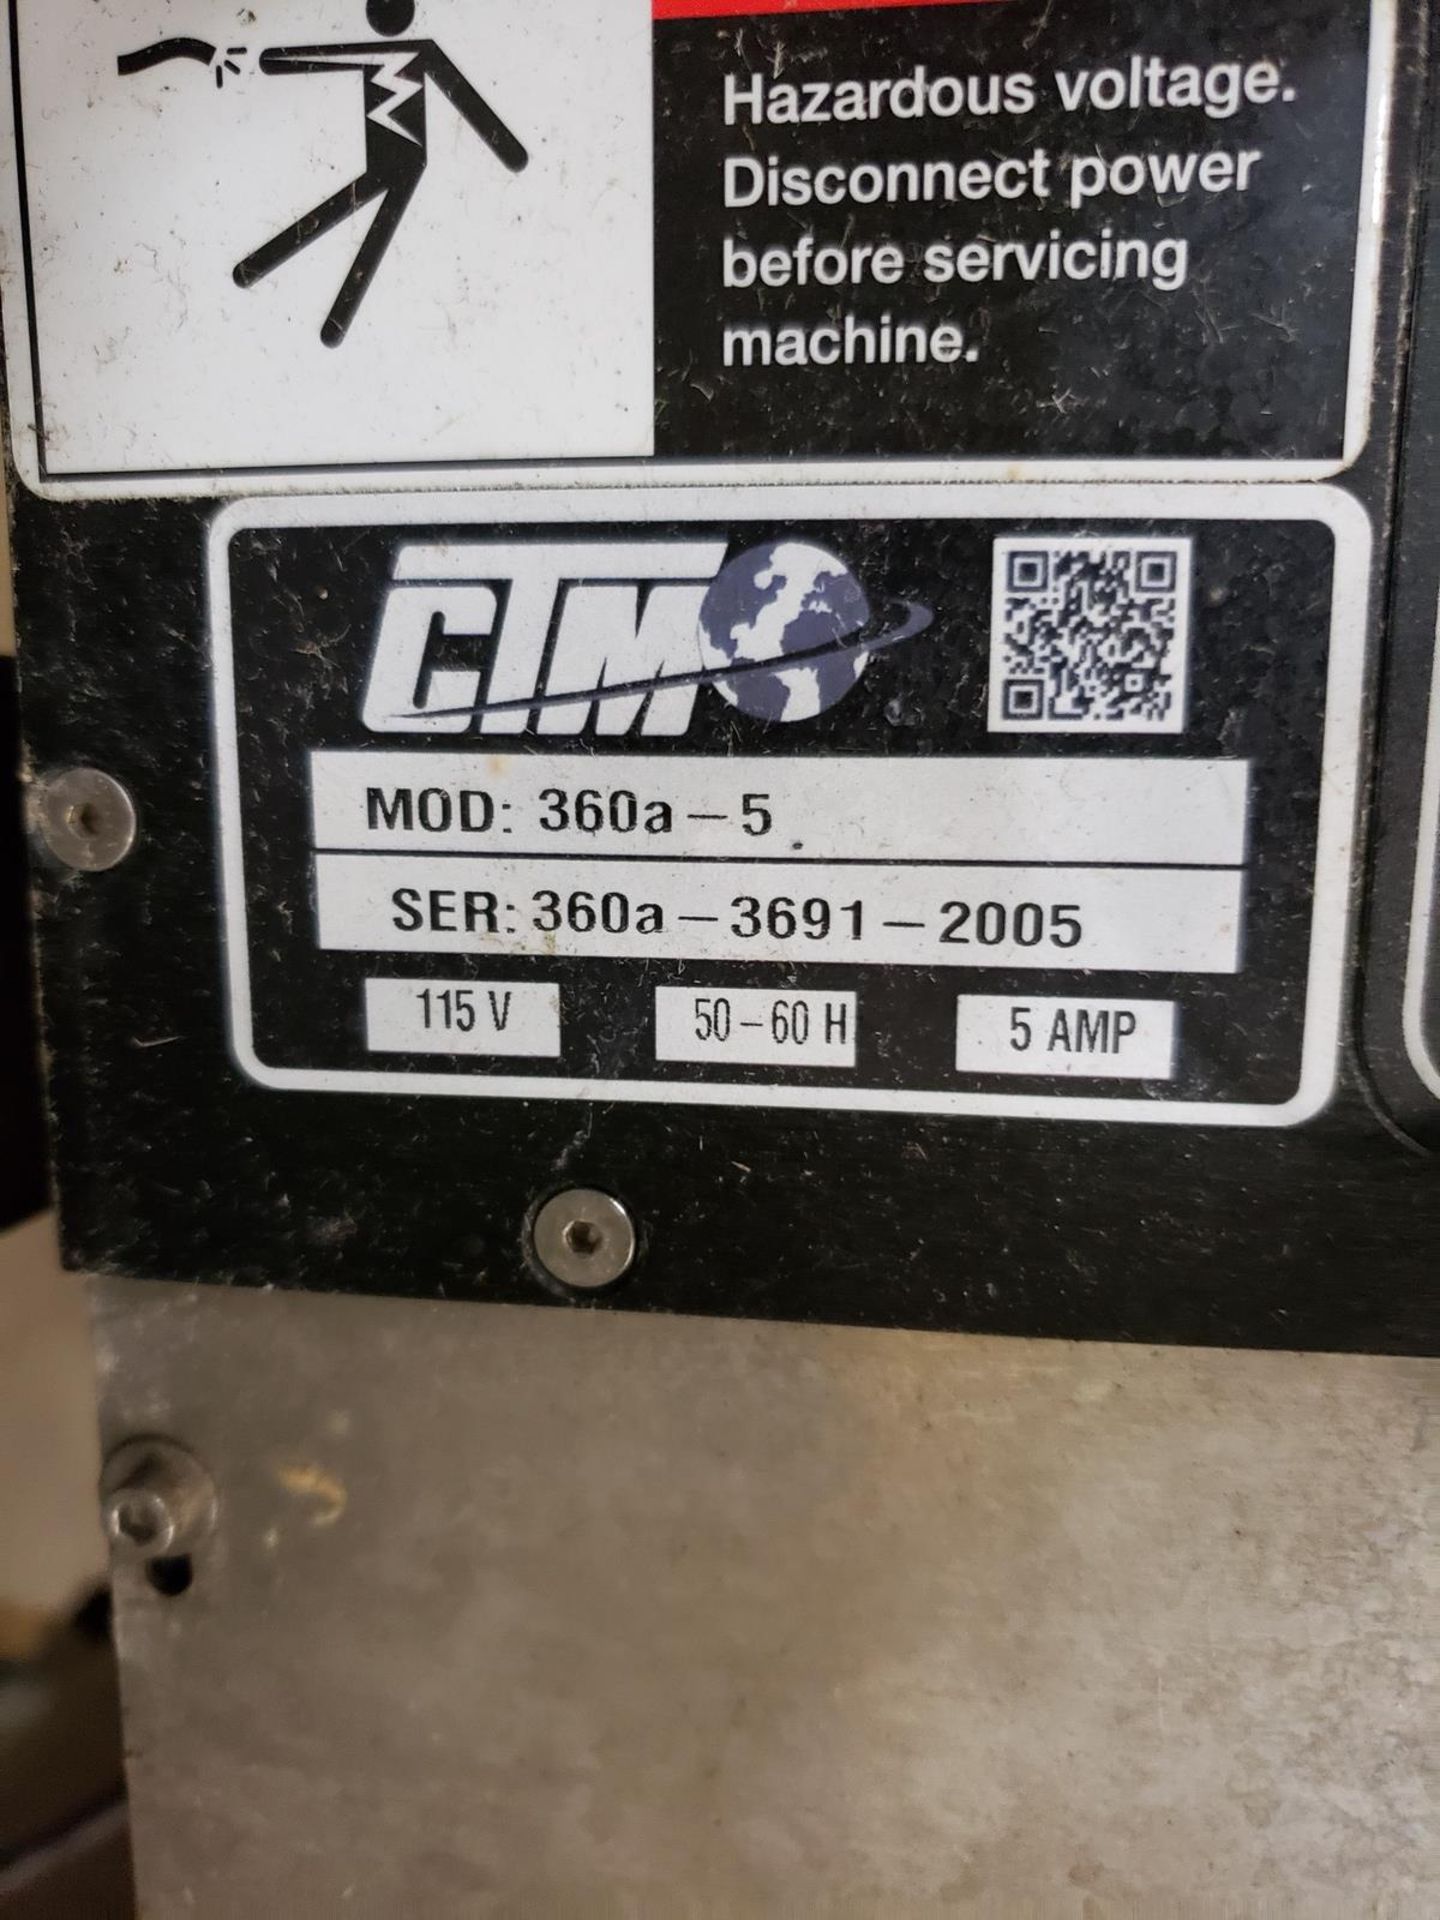 CTM High Speed Label Applicator, M# 360a-5, S/N 360a-3691-2006 - Image 2 of 2